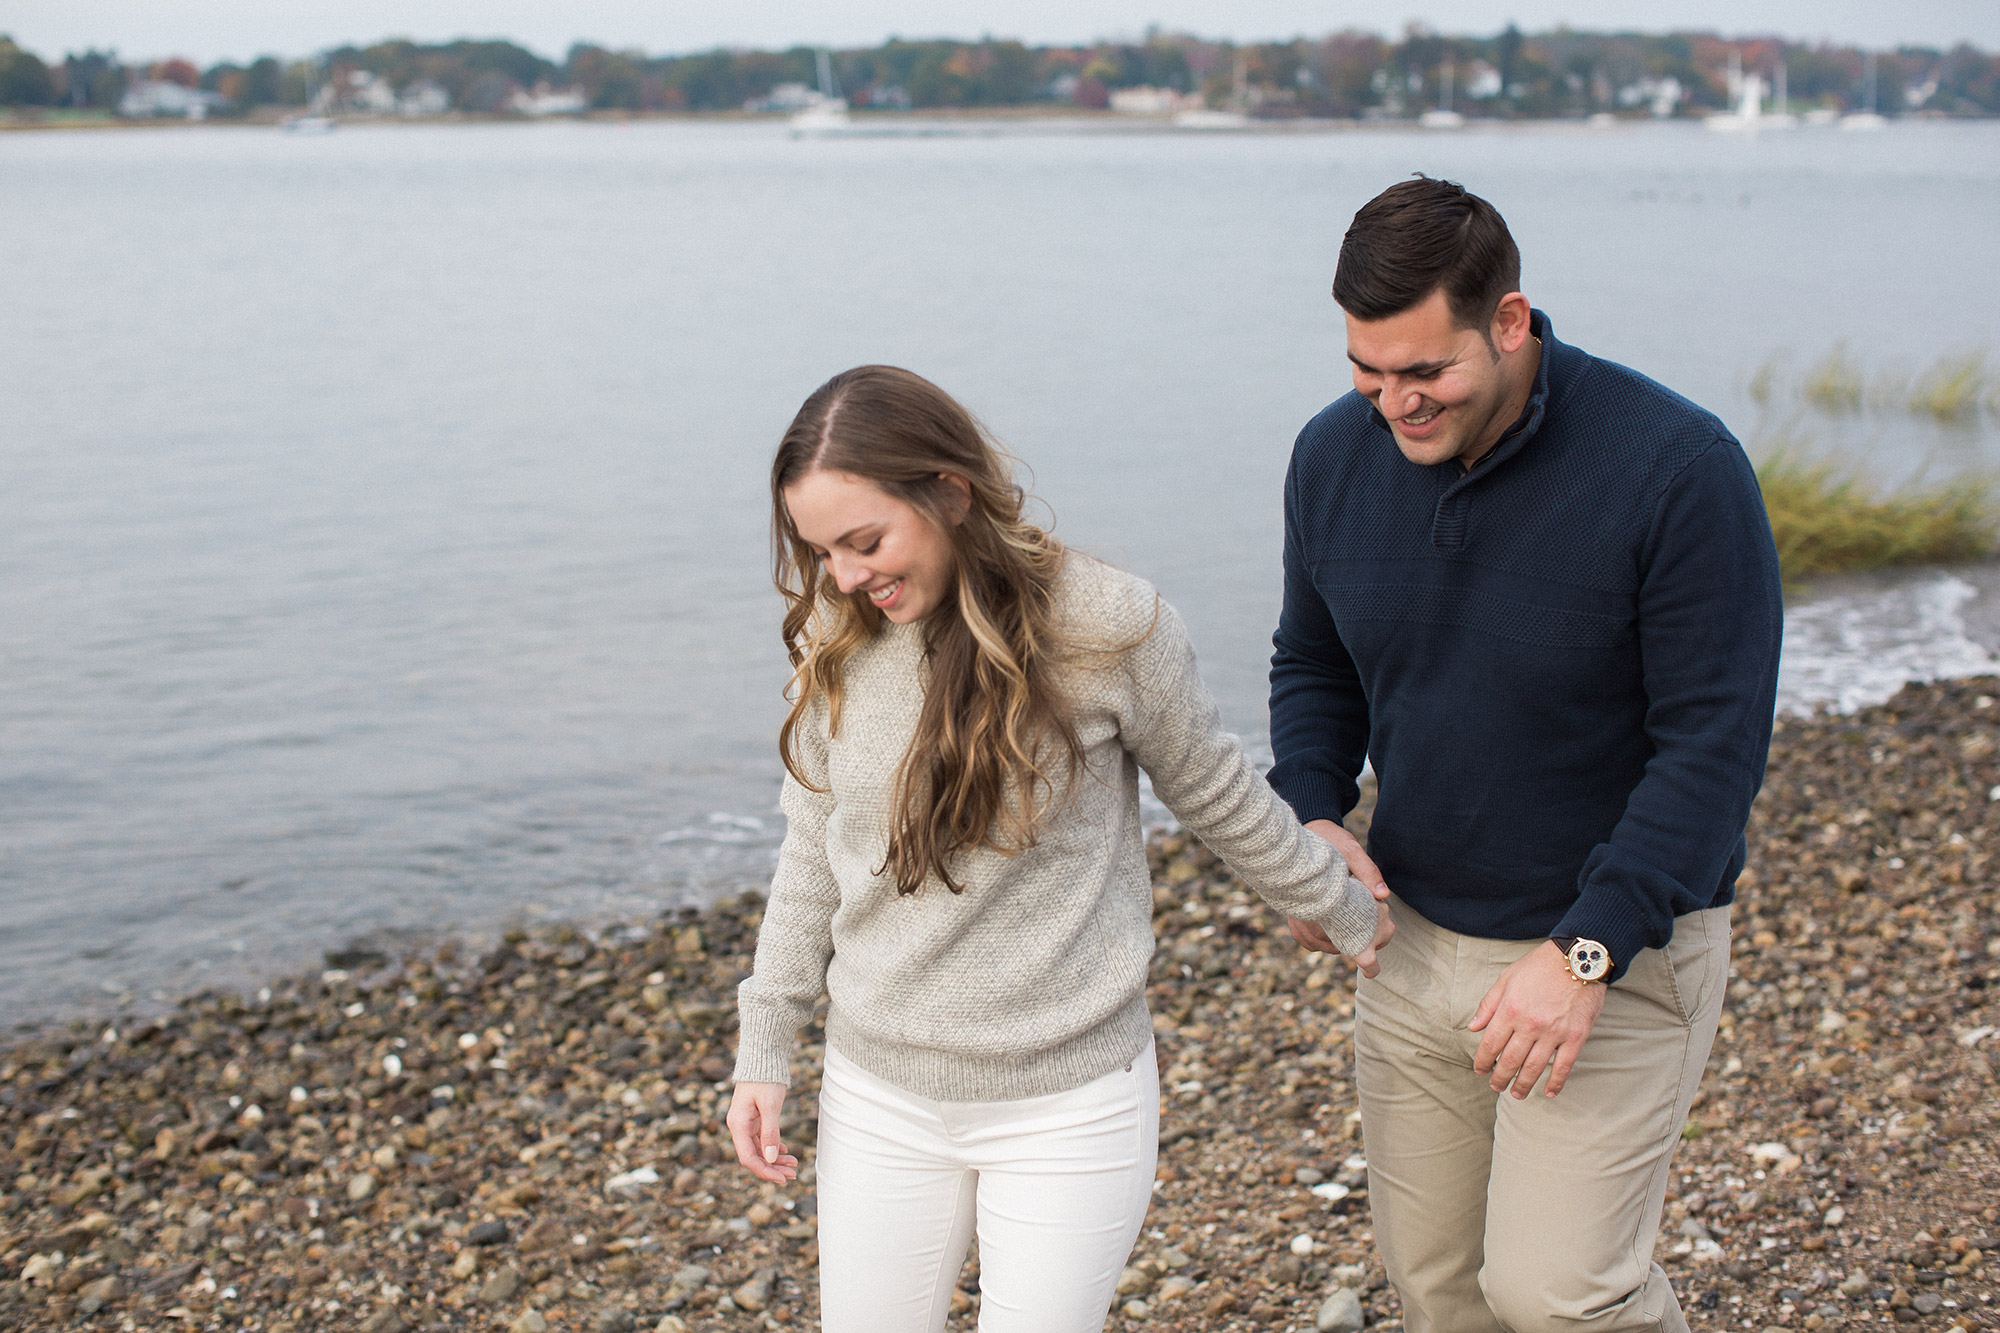 Engagement session at Tod's Point in Greenwich, Connecticut.